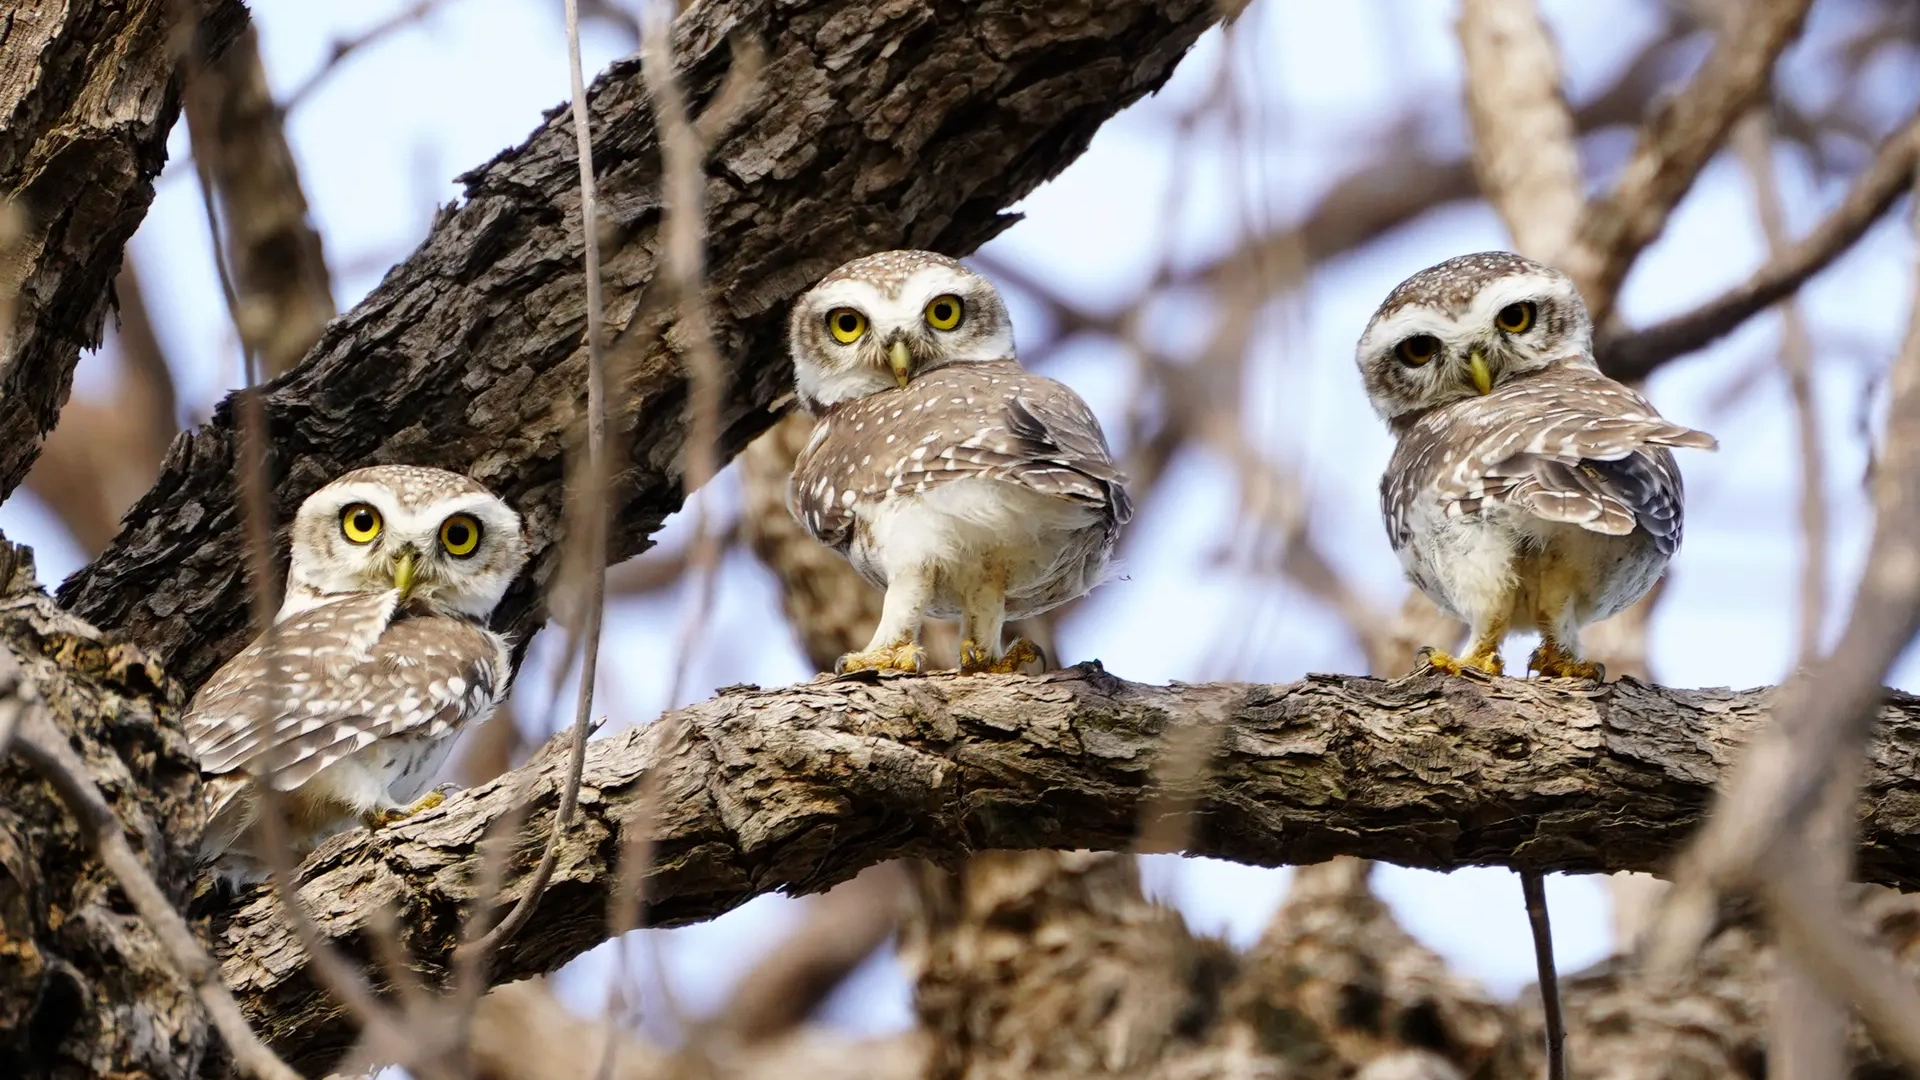 General 1920x1080 animals birds owl nature wildlife wings depth of field feathers looking at viewer branch